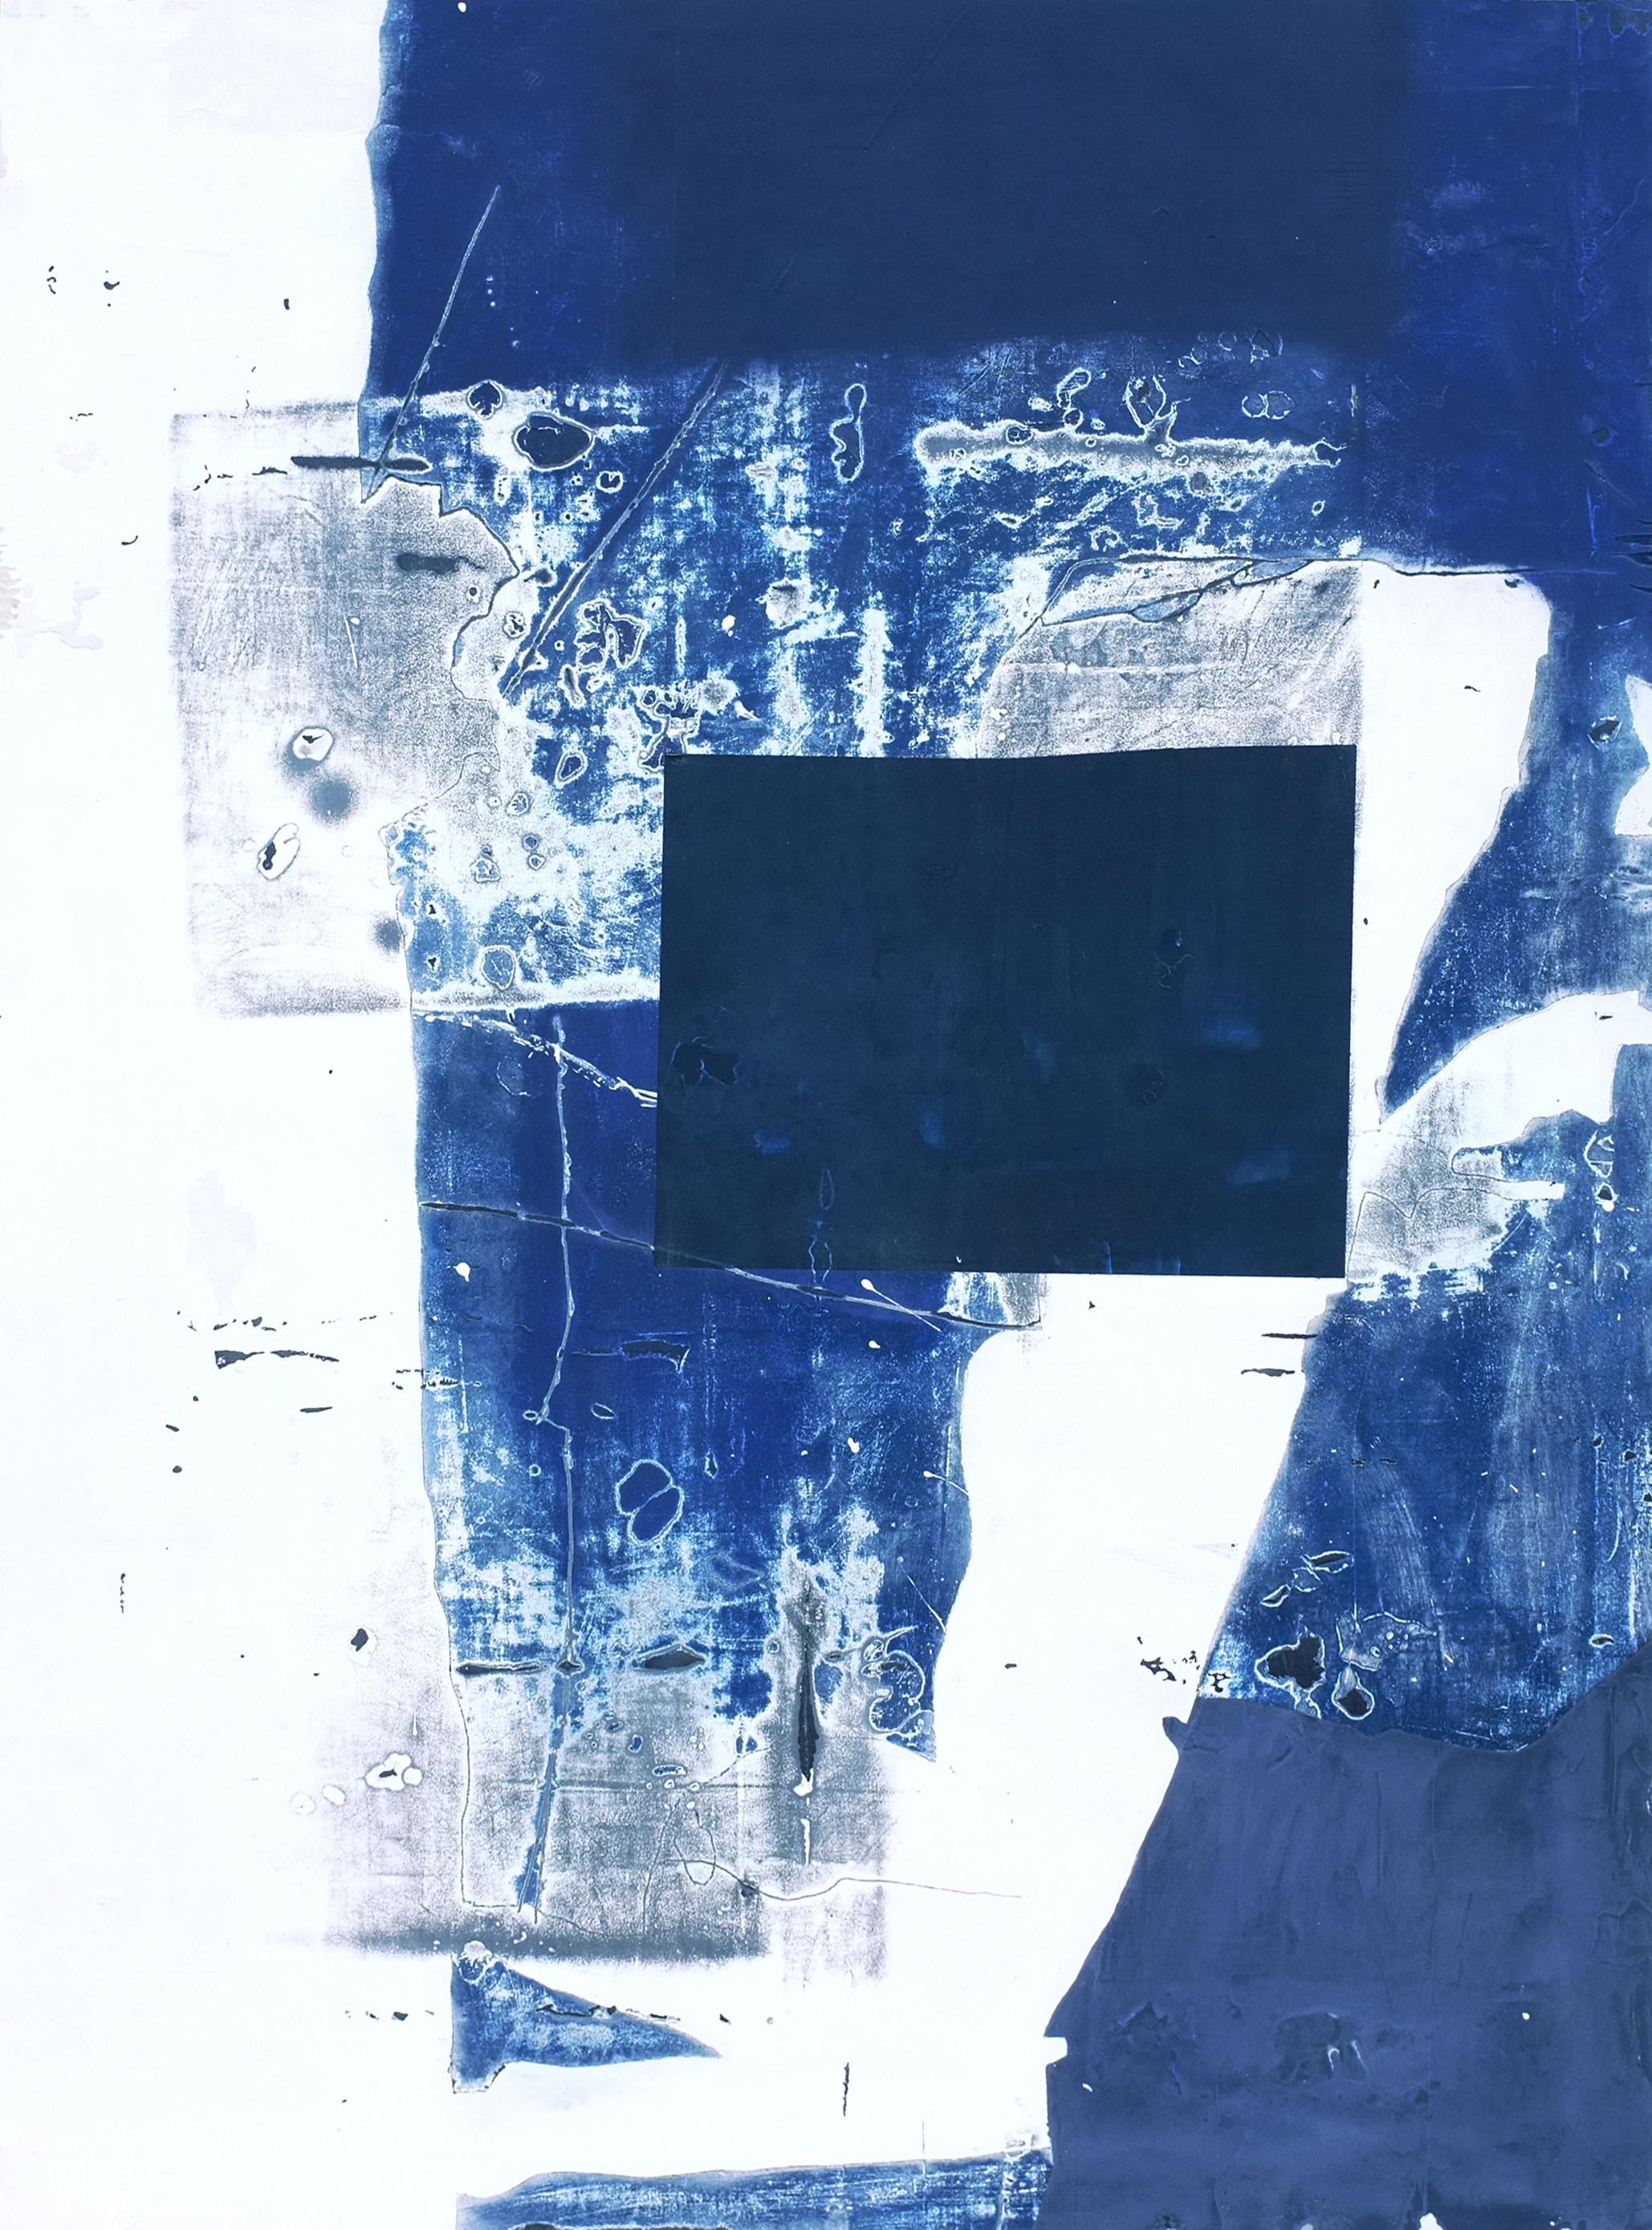 'I'm Picturing You Naked' by Antoine Puisais - soft and meditative mixed media on linen. It is an abstract collage with architectural geometrical patterns and intense blue shades. Its small size, graphic design, and relaxing color will complement